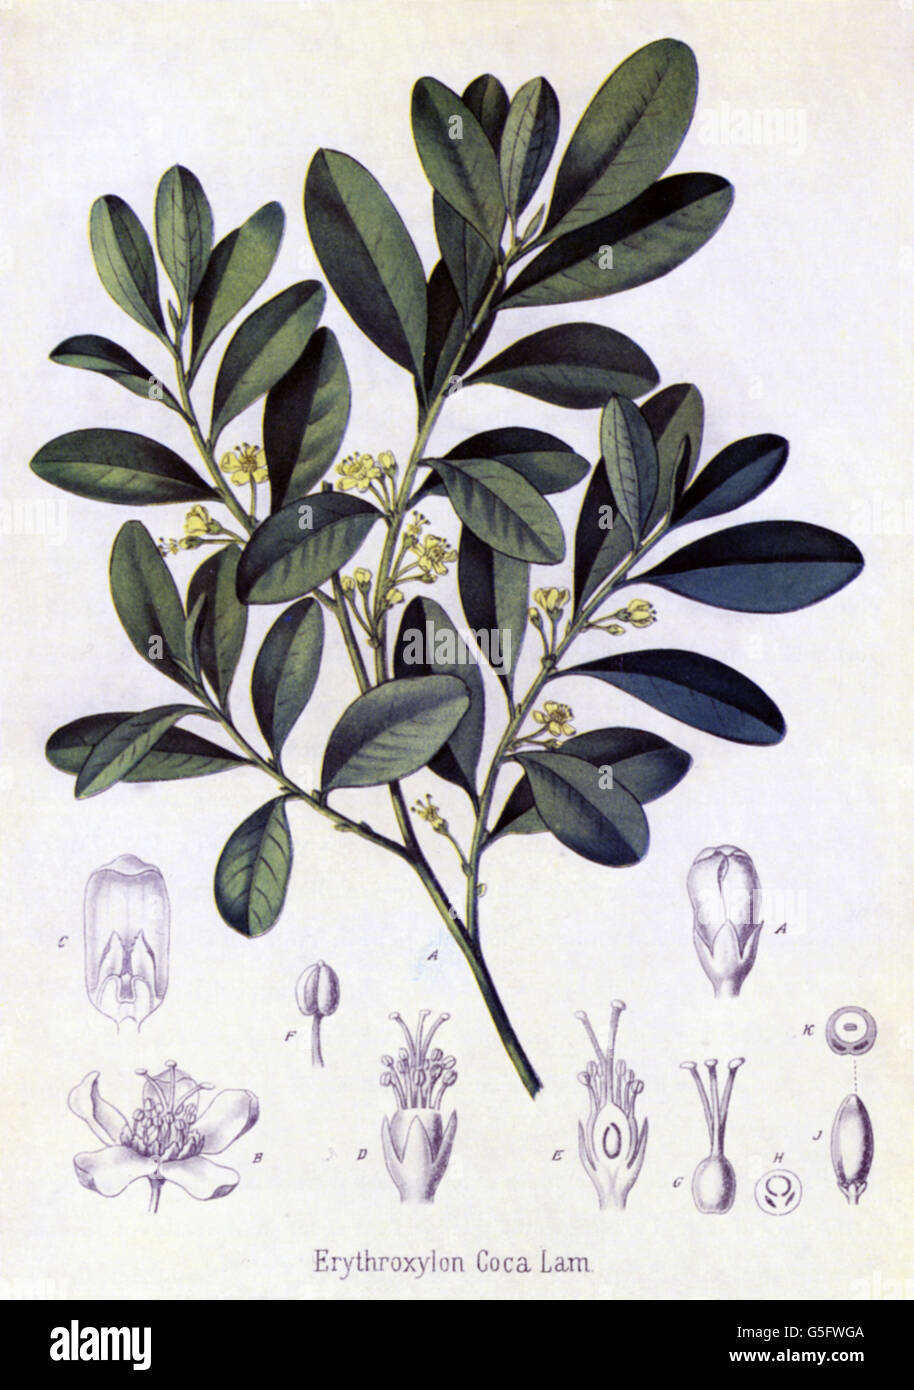 botany, coca bush (Erythroxylum coca), leaves and blossoms, coloured print, "Atlas der Officinellen Pflanzen" by Michael Berg and C. F. Schmidt, 1893, Additional-Rights-Clearences-Not Available Stock Photo